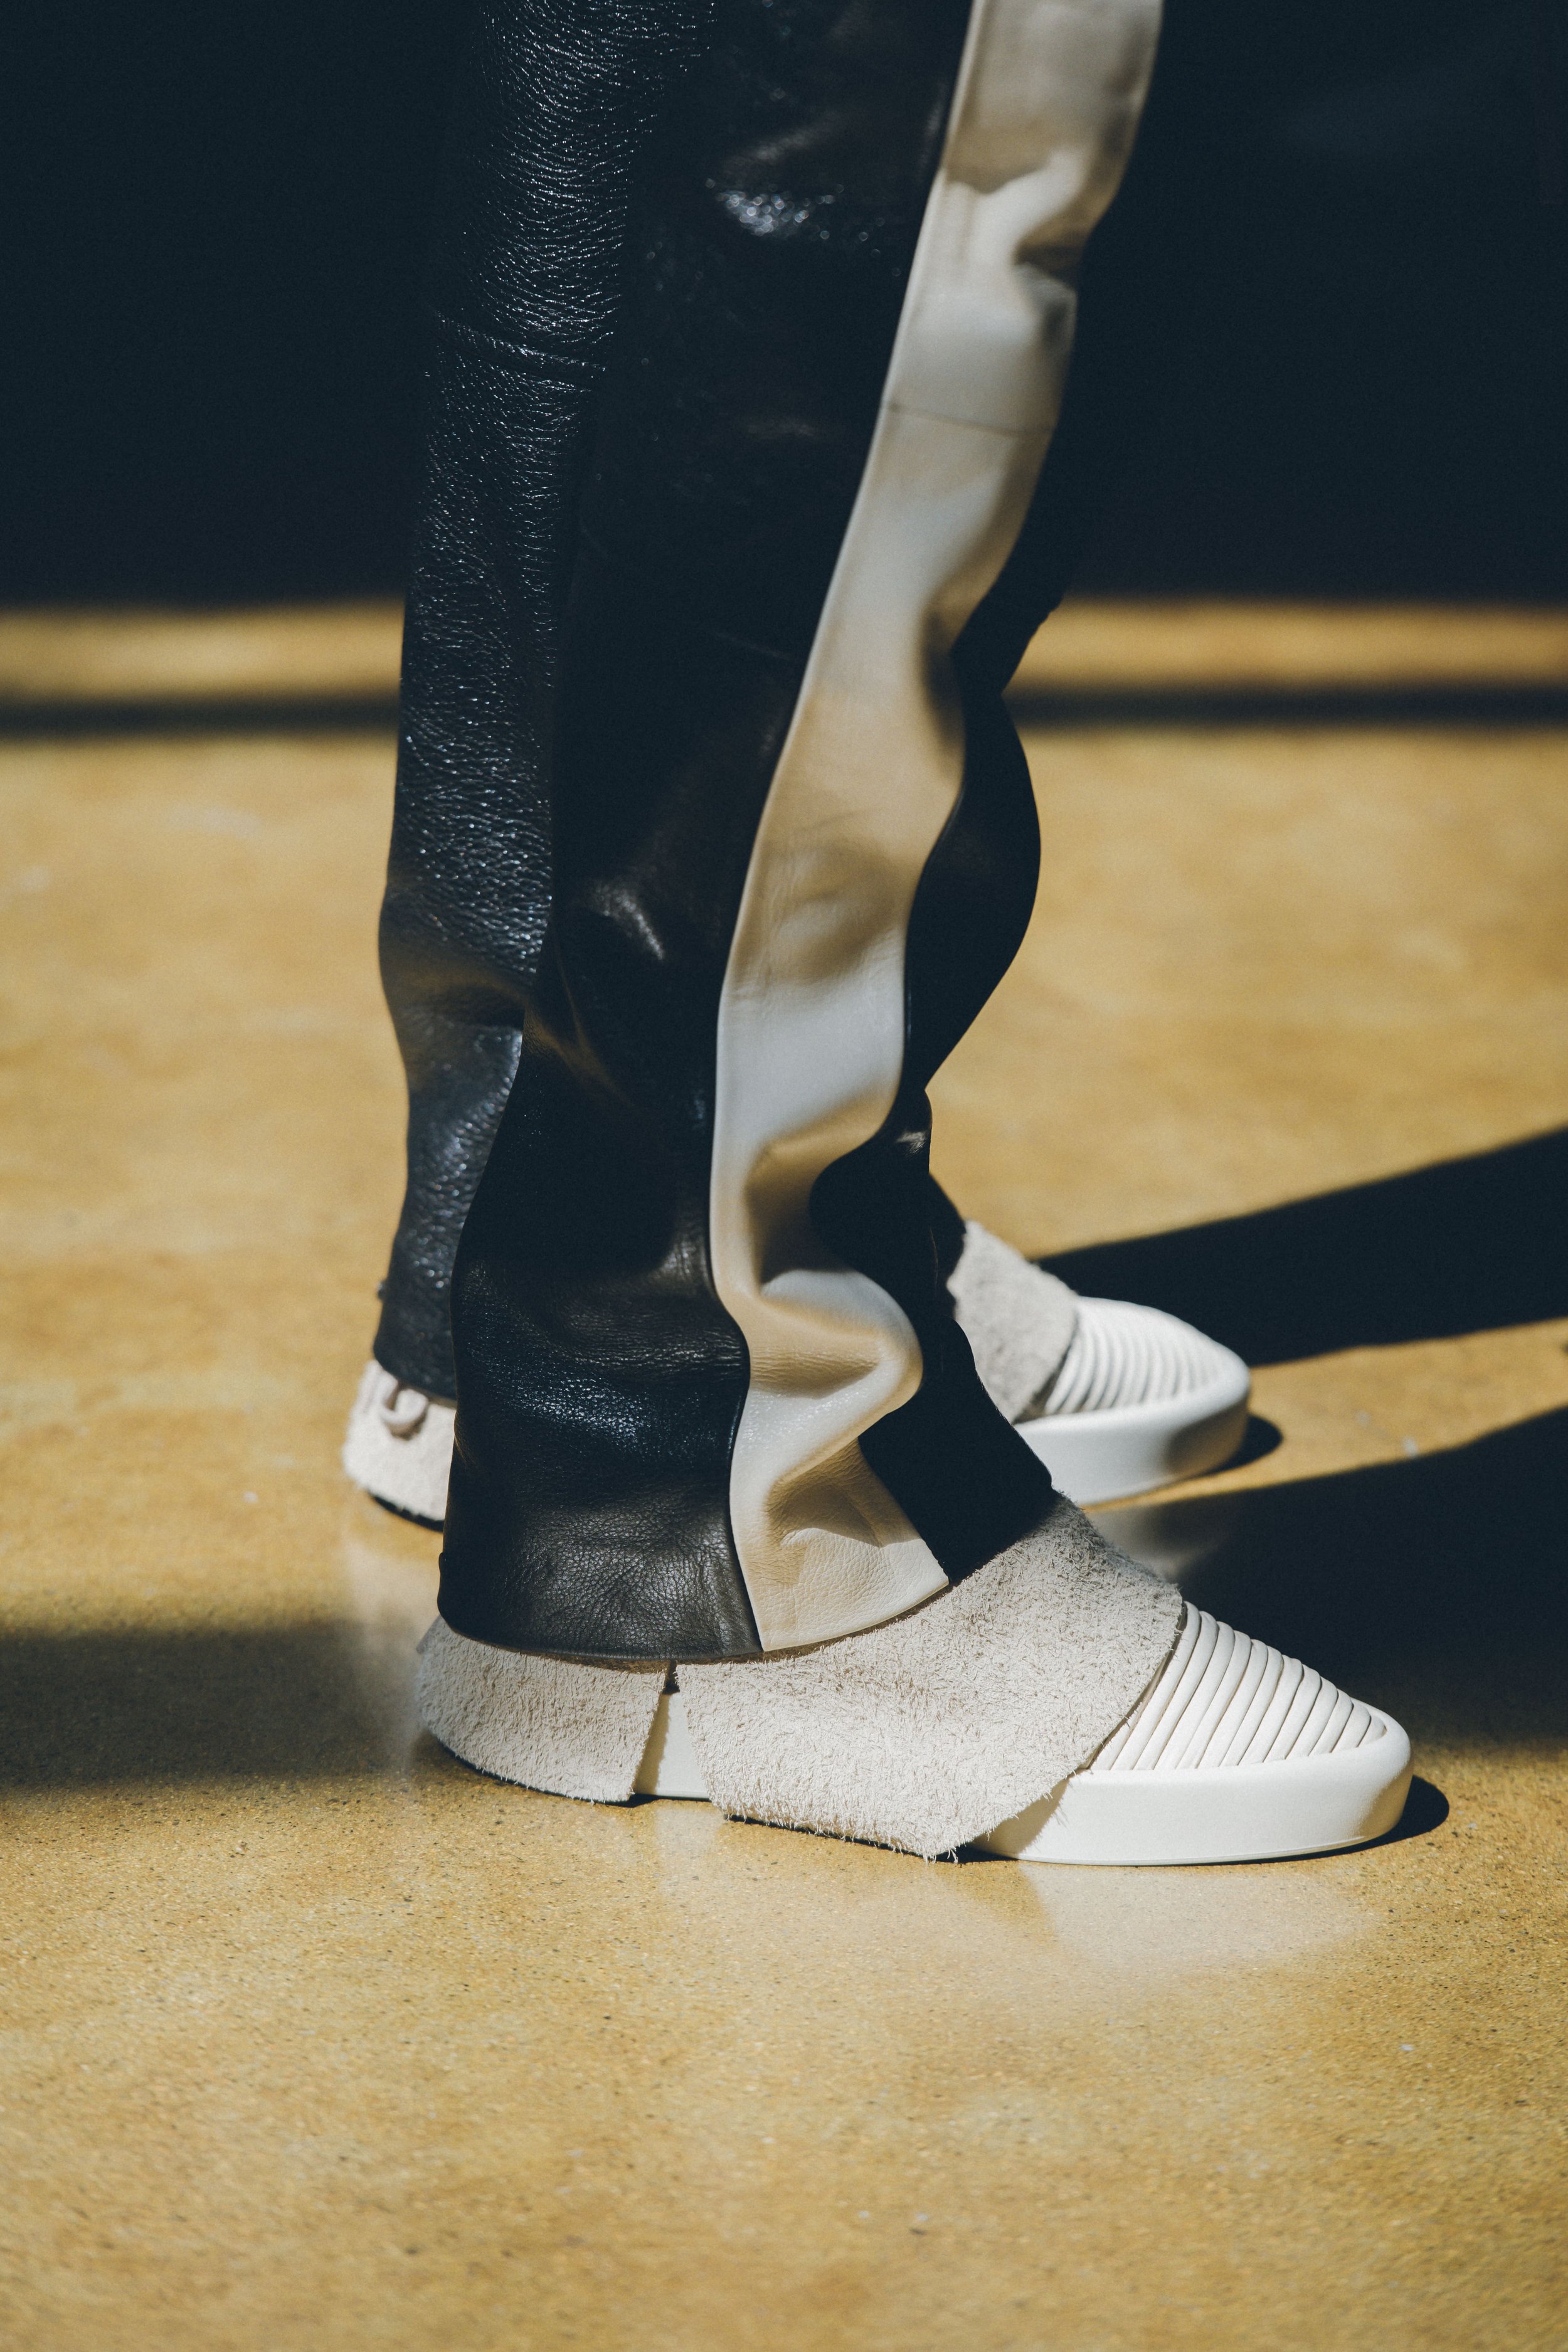 Fear of God's two-year process on developing its footwear, and how